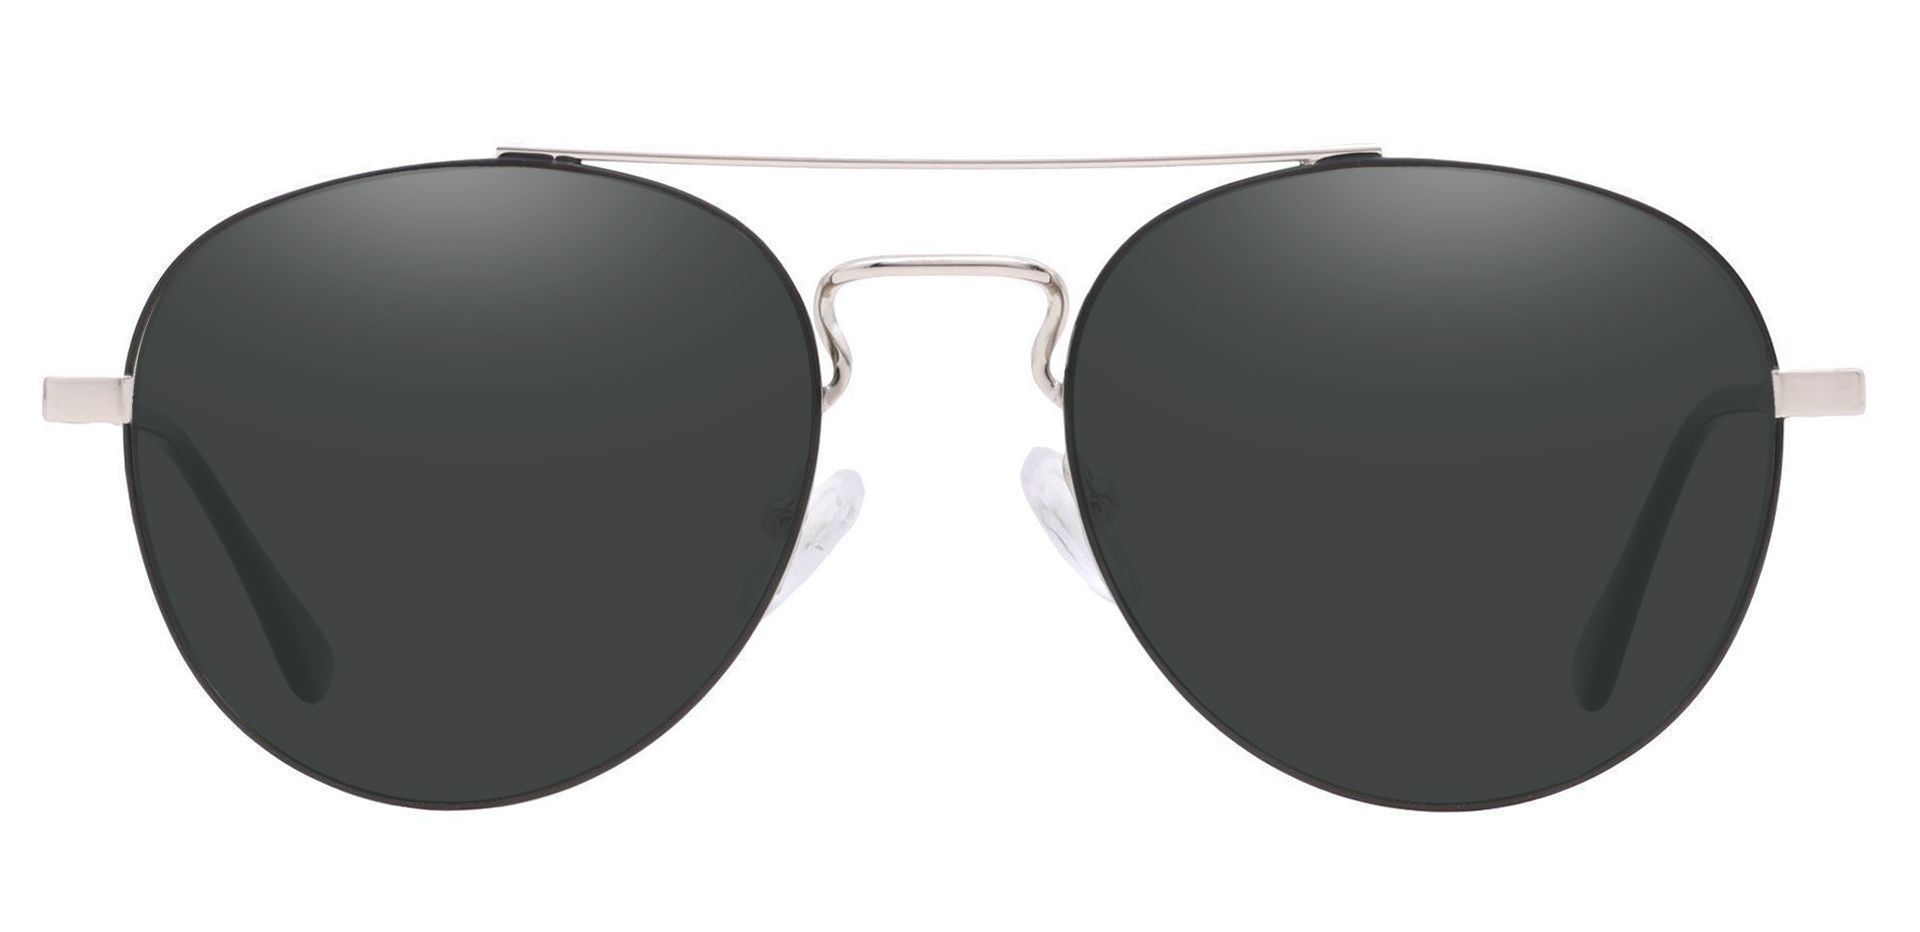 Trapp Aviator Lined Bifocal Sunglasses - Gray Frame With Gray Lenses